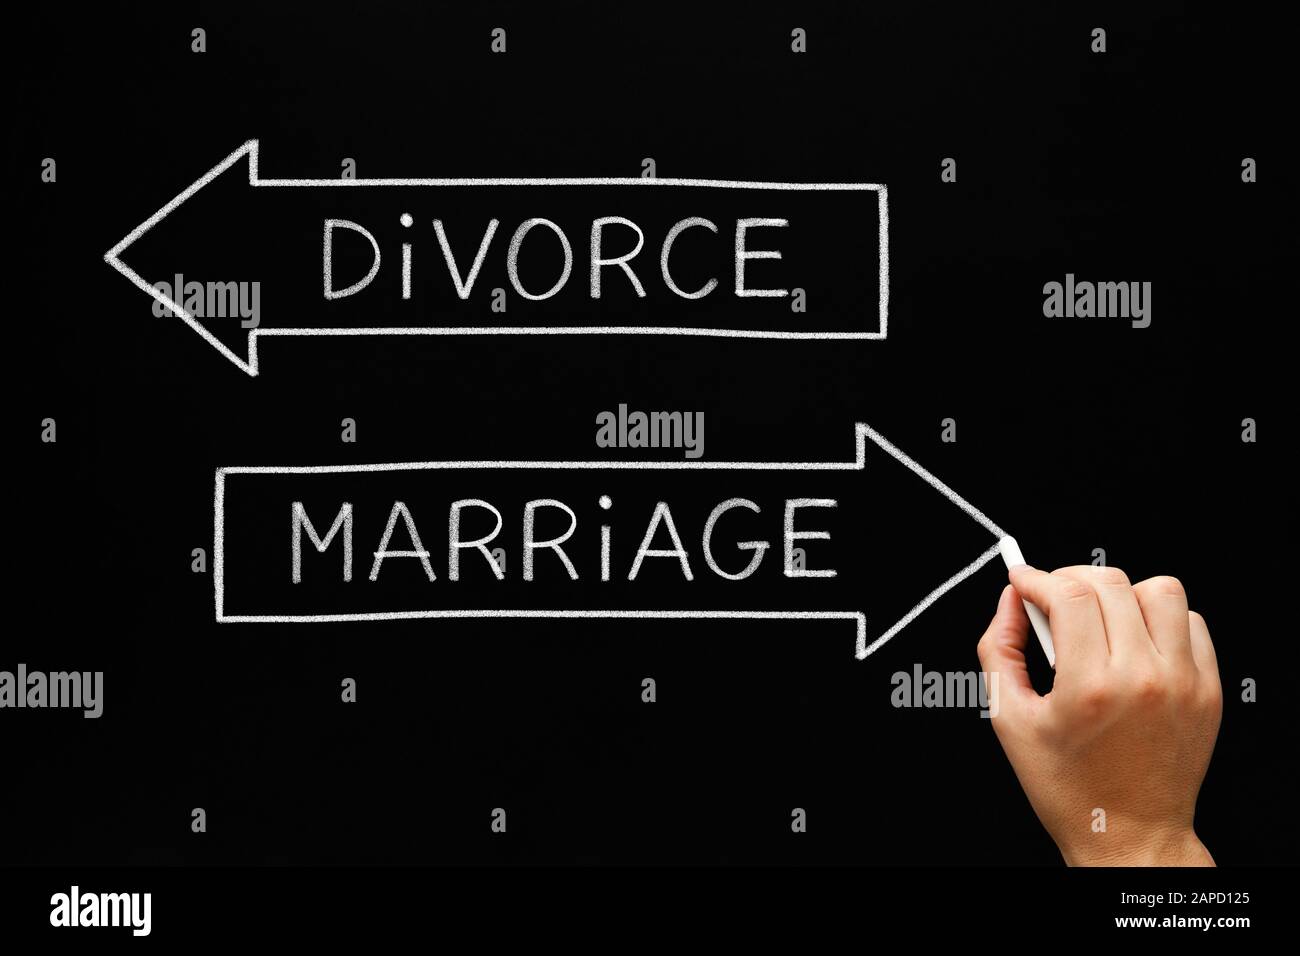 Hand writing the words Marriage or Divorce on two arrows with white chalk on blackboard. Stock Photo